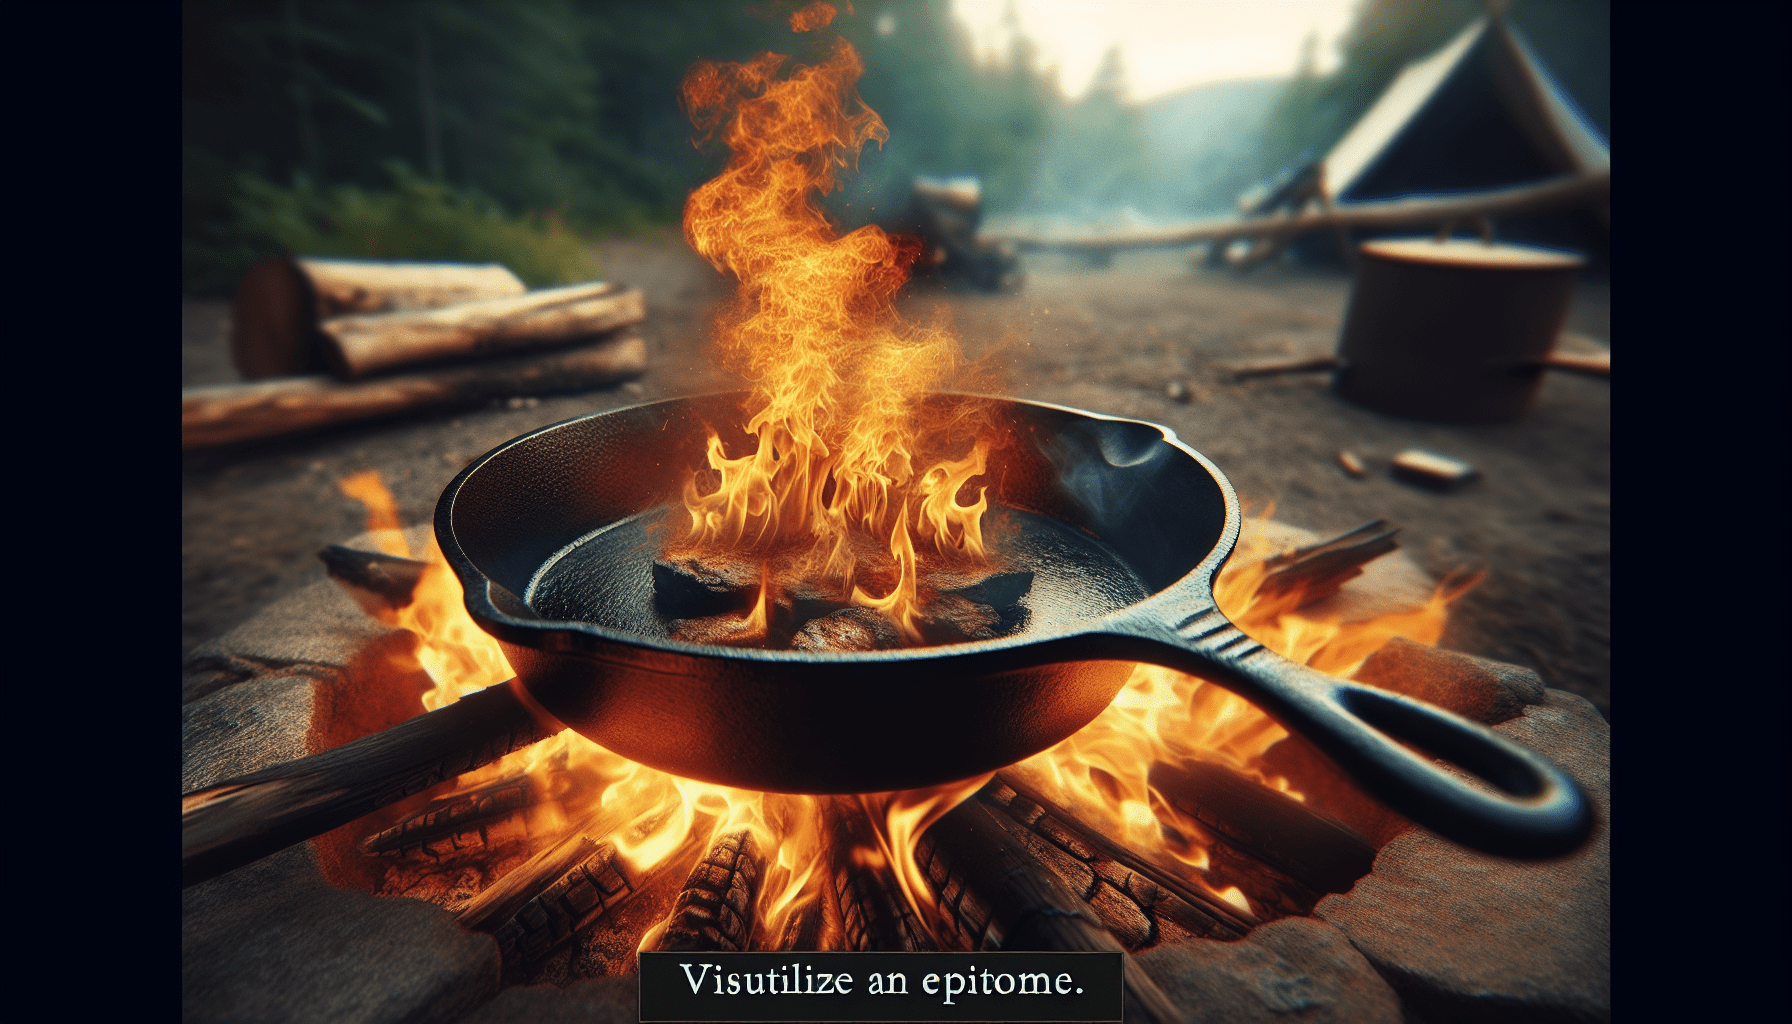 What Is The Best Cookware To Use Over A Fire?